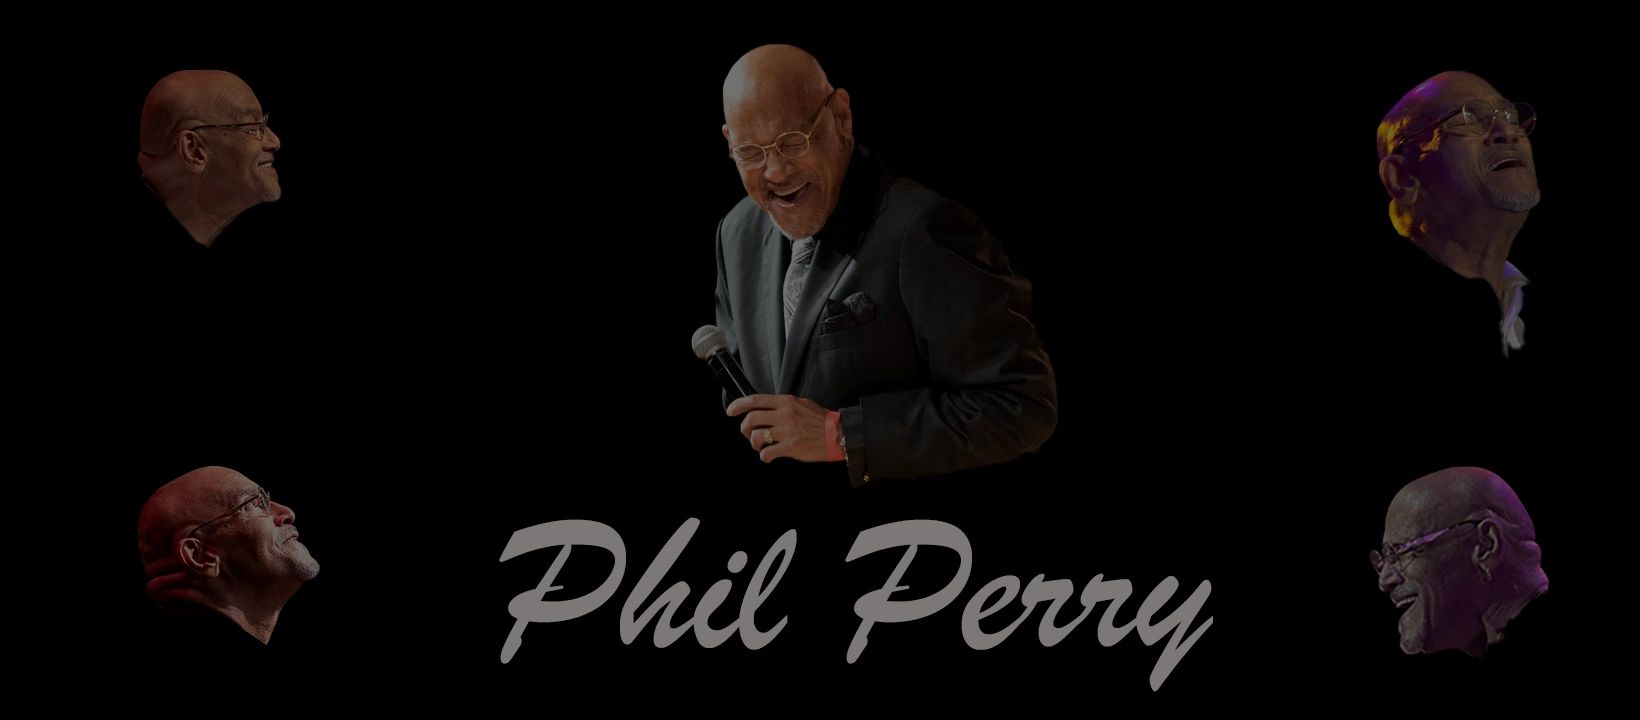 phil perry tour dates